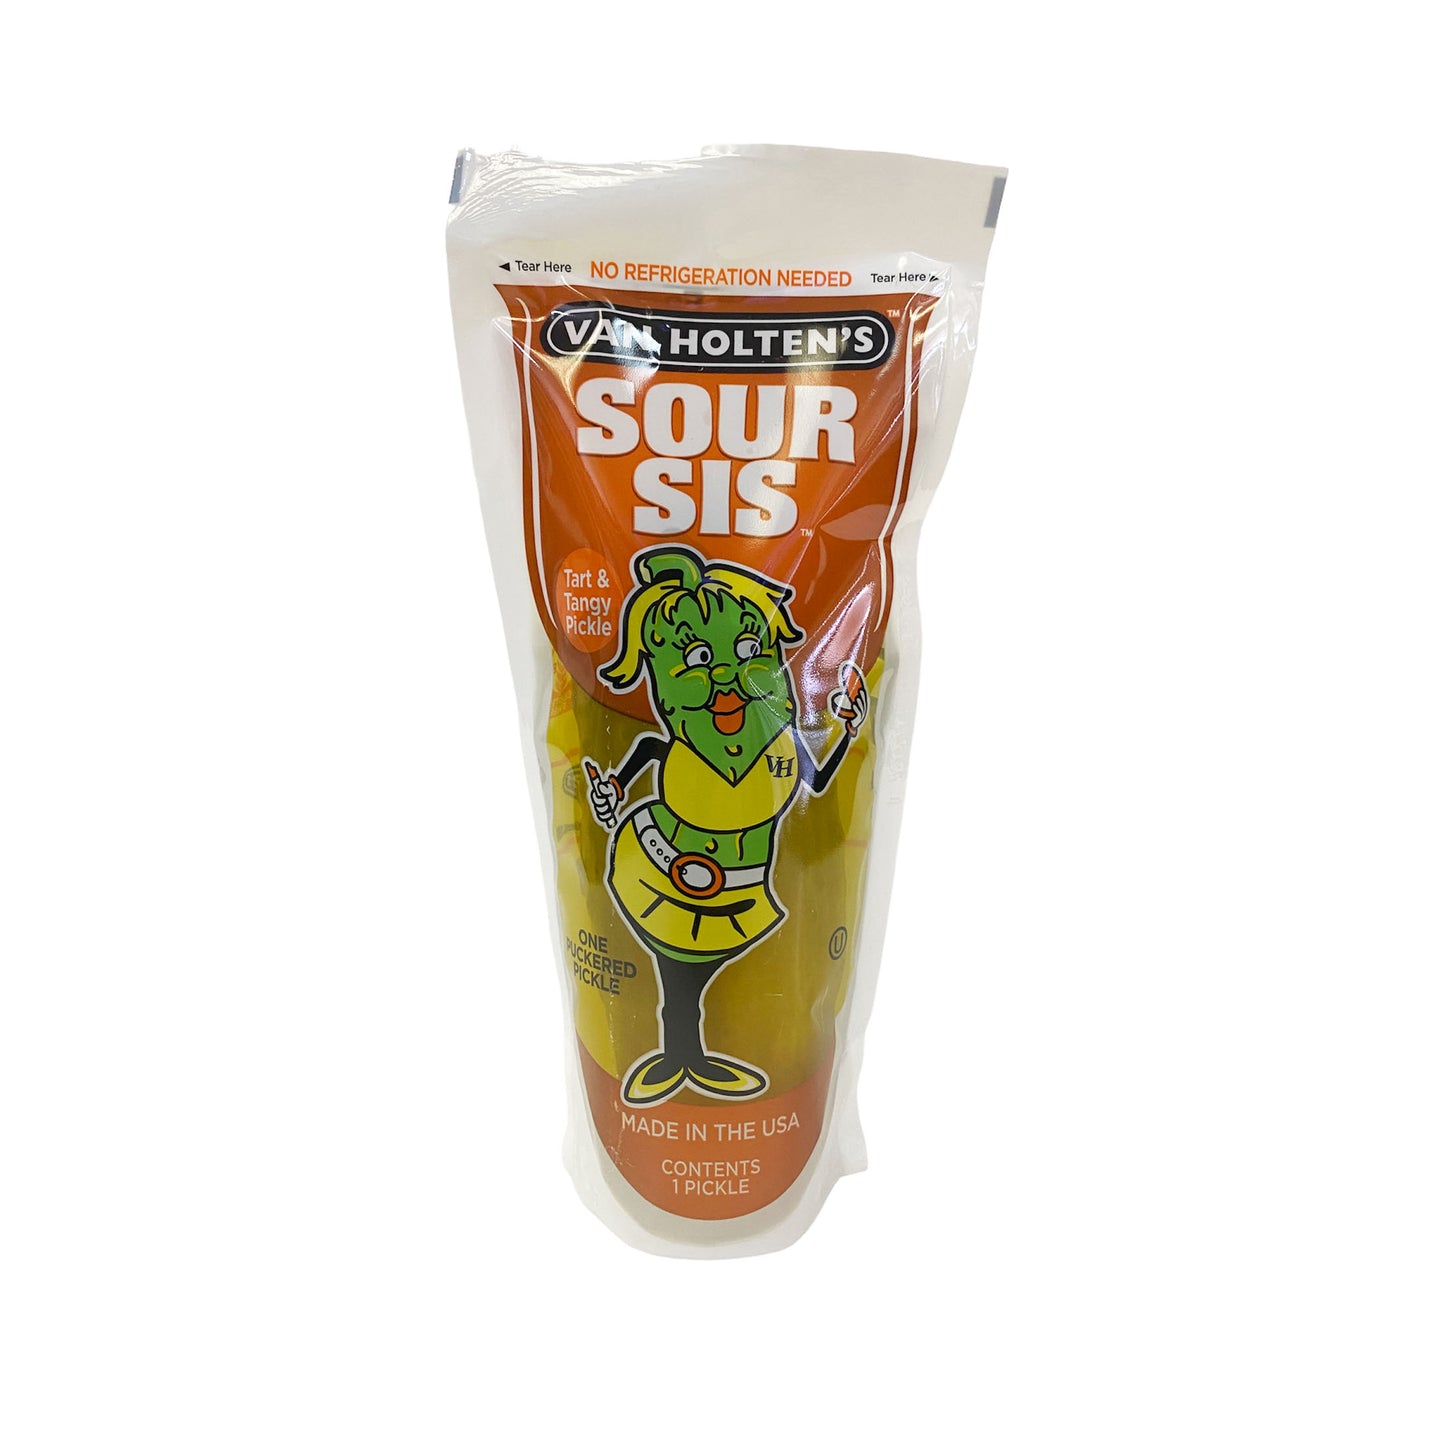 Van Holten's Pickle-In-A-Pouch Sour Sis - 28g